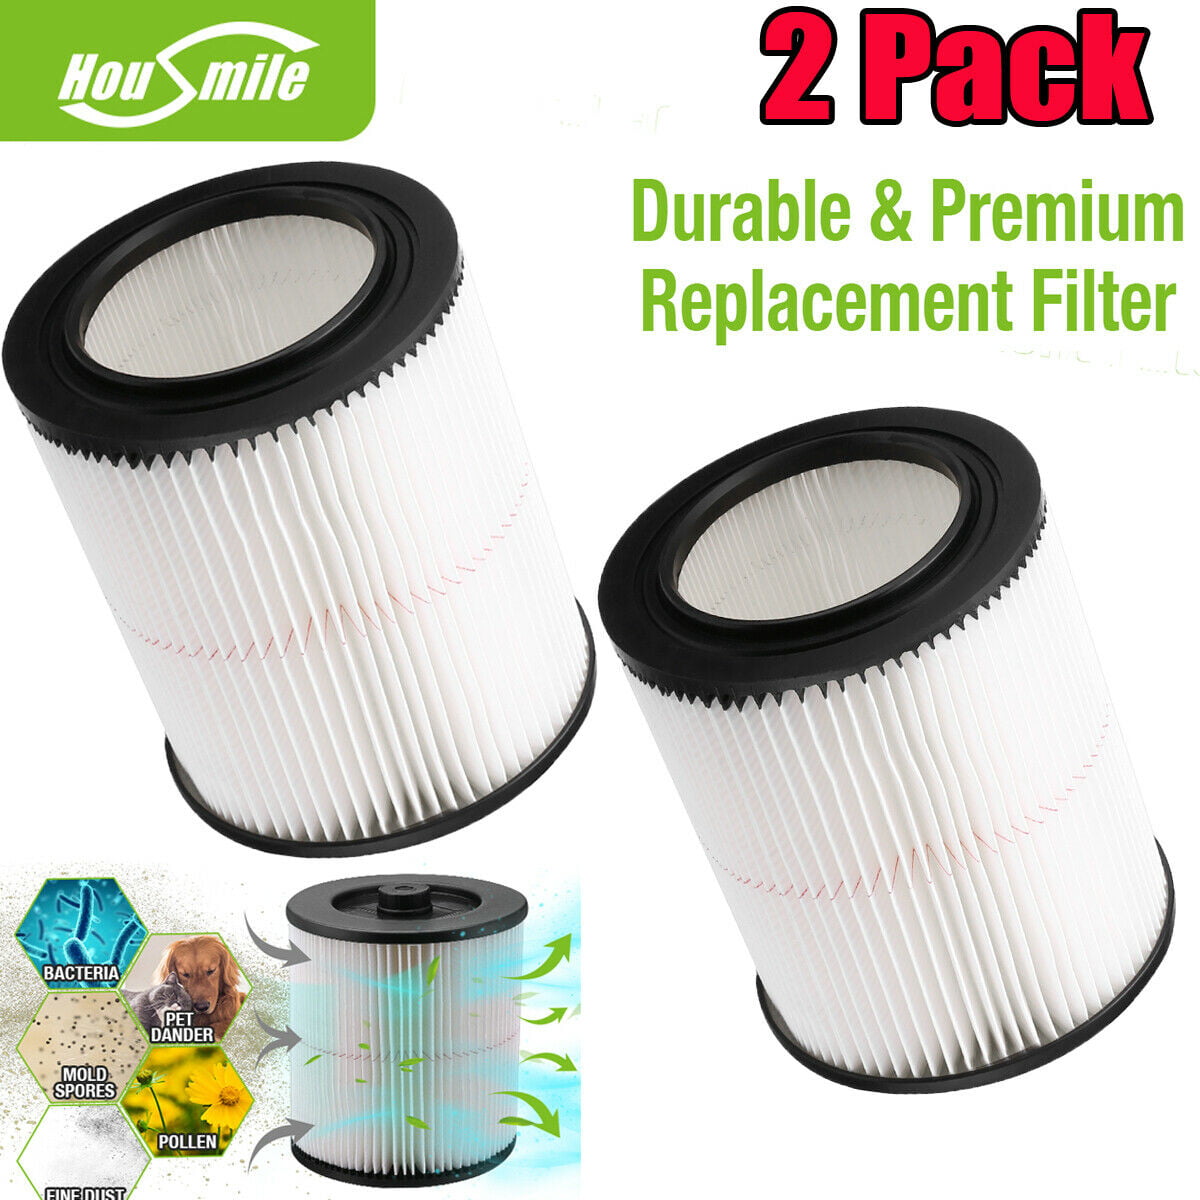 9-17816 Replacement Wet Dry Craftsman 17816 Vacuum Filter Kits For Shop Vac 